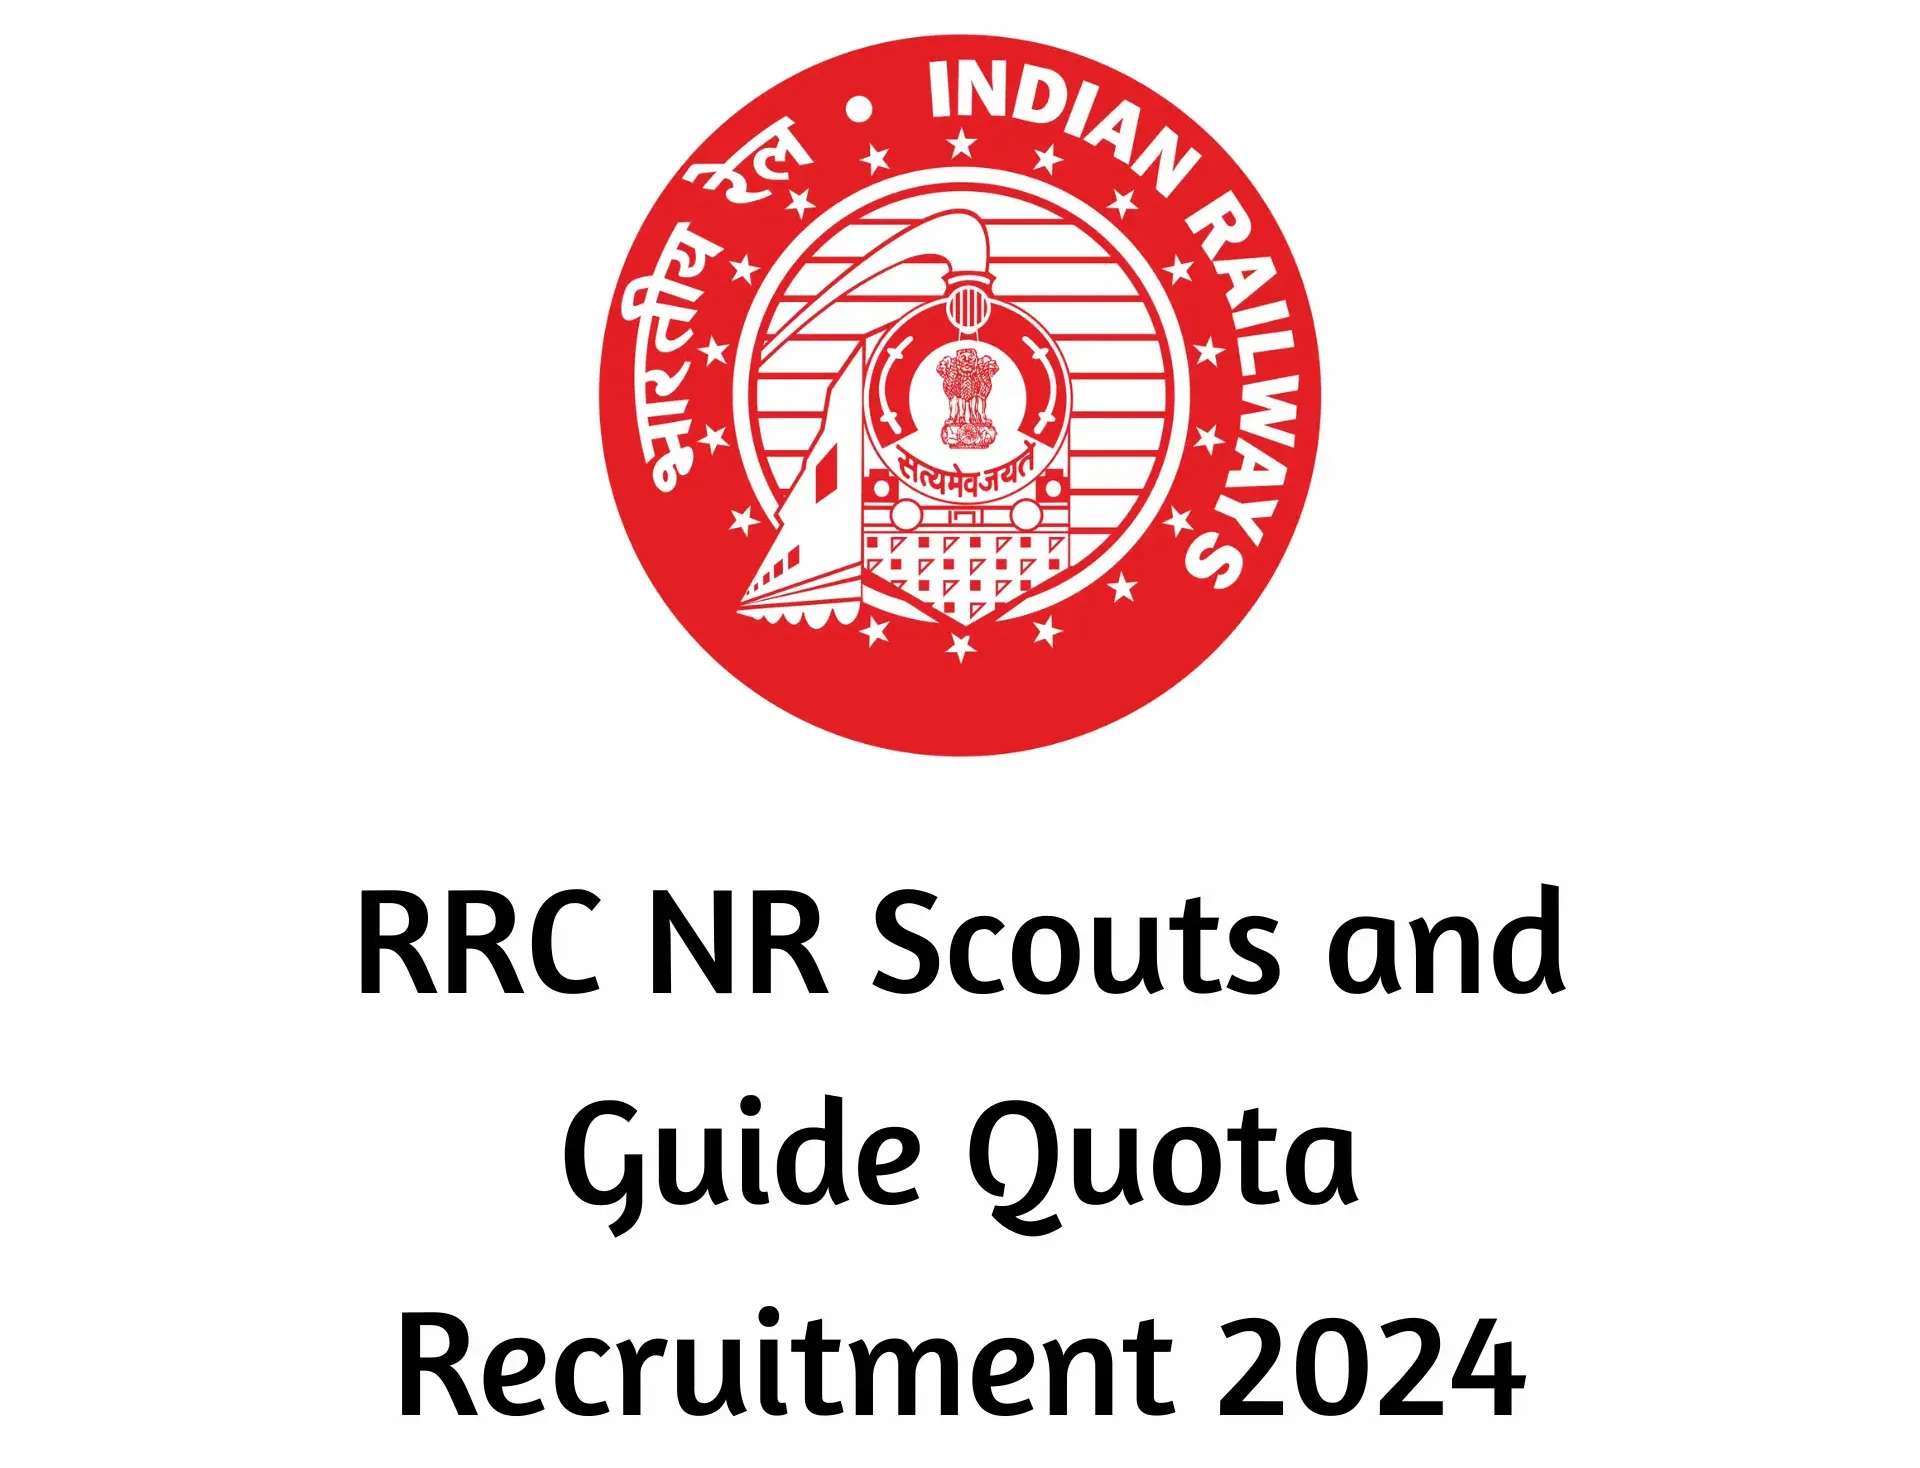 RRC NR Scouts and Guide Quota Recruitment 2024